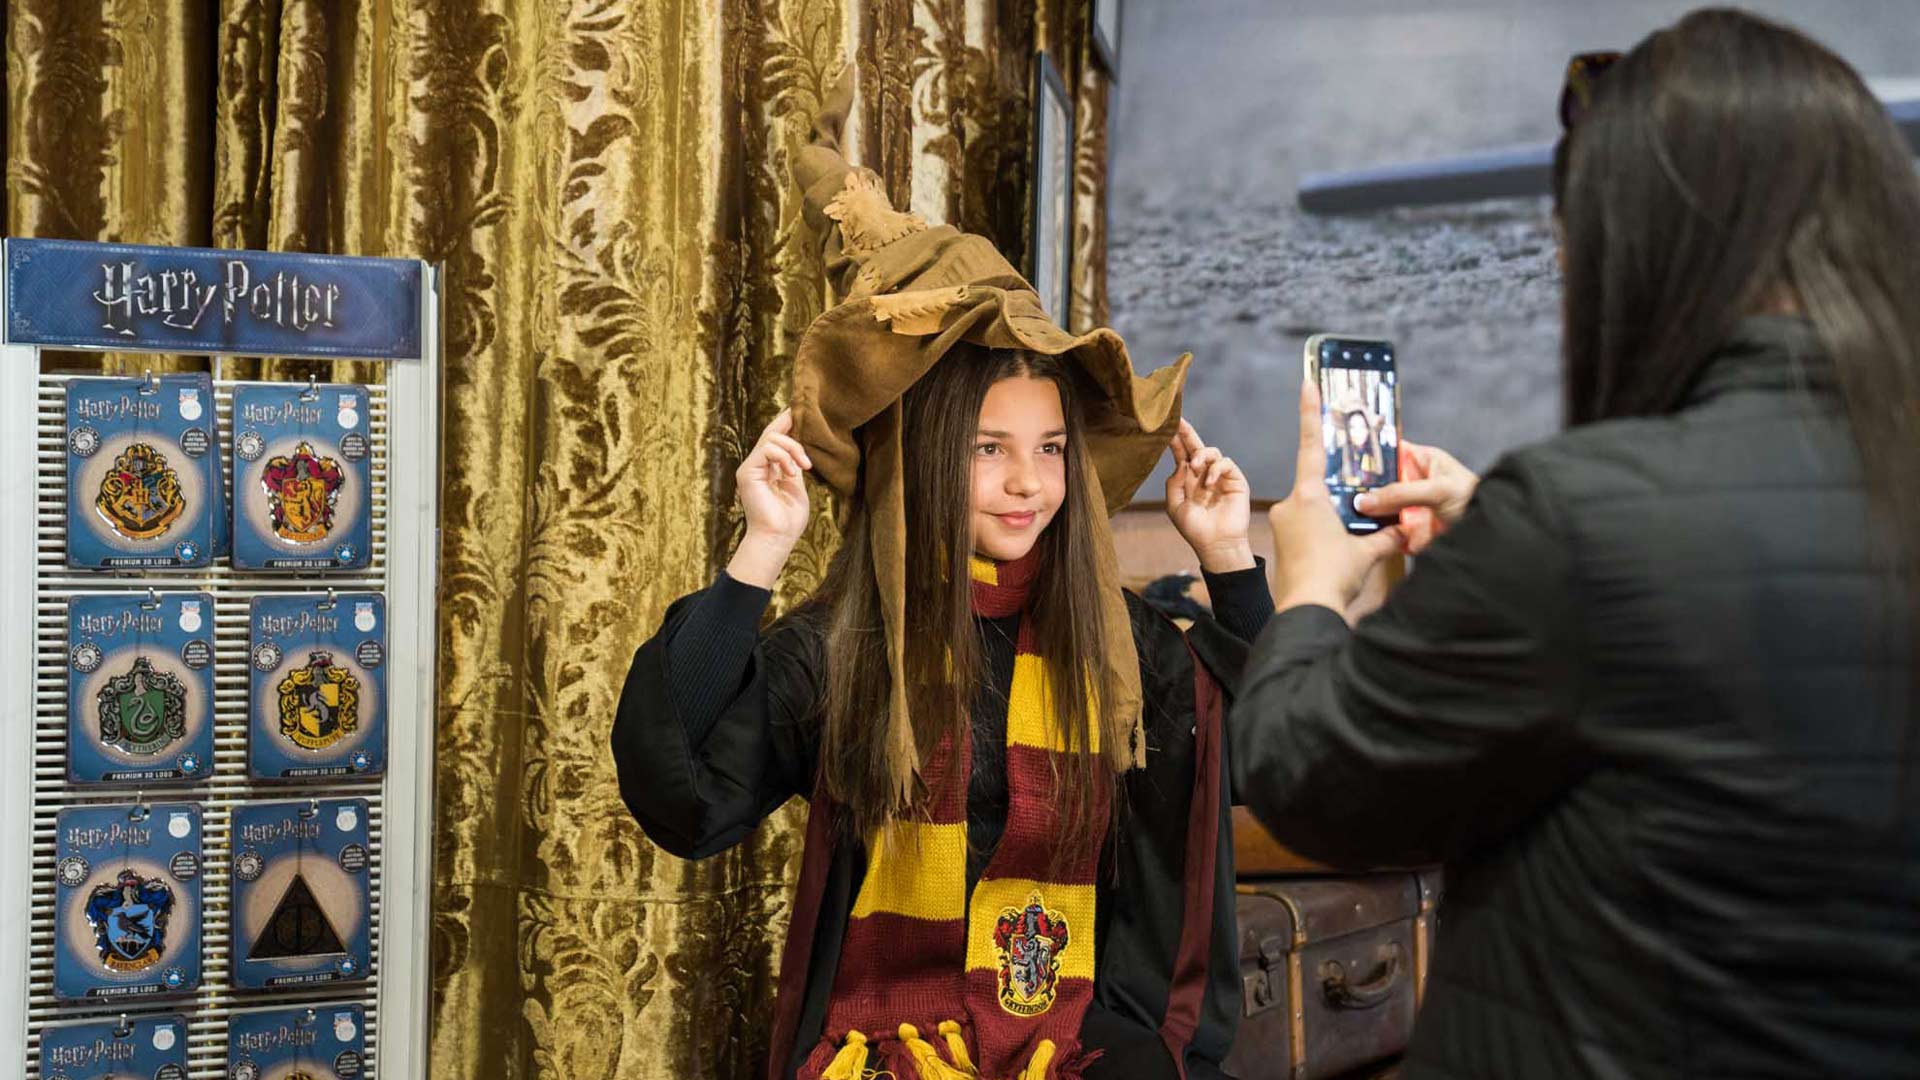 Melbourne First Dedicated 'Harry Potter' Store Is Now Open